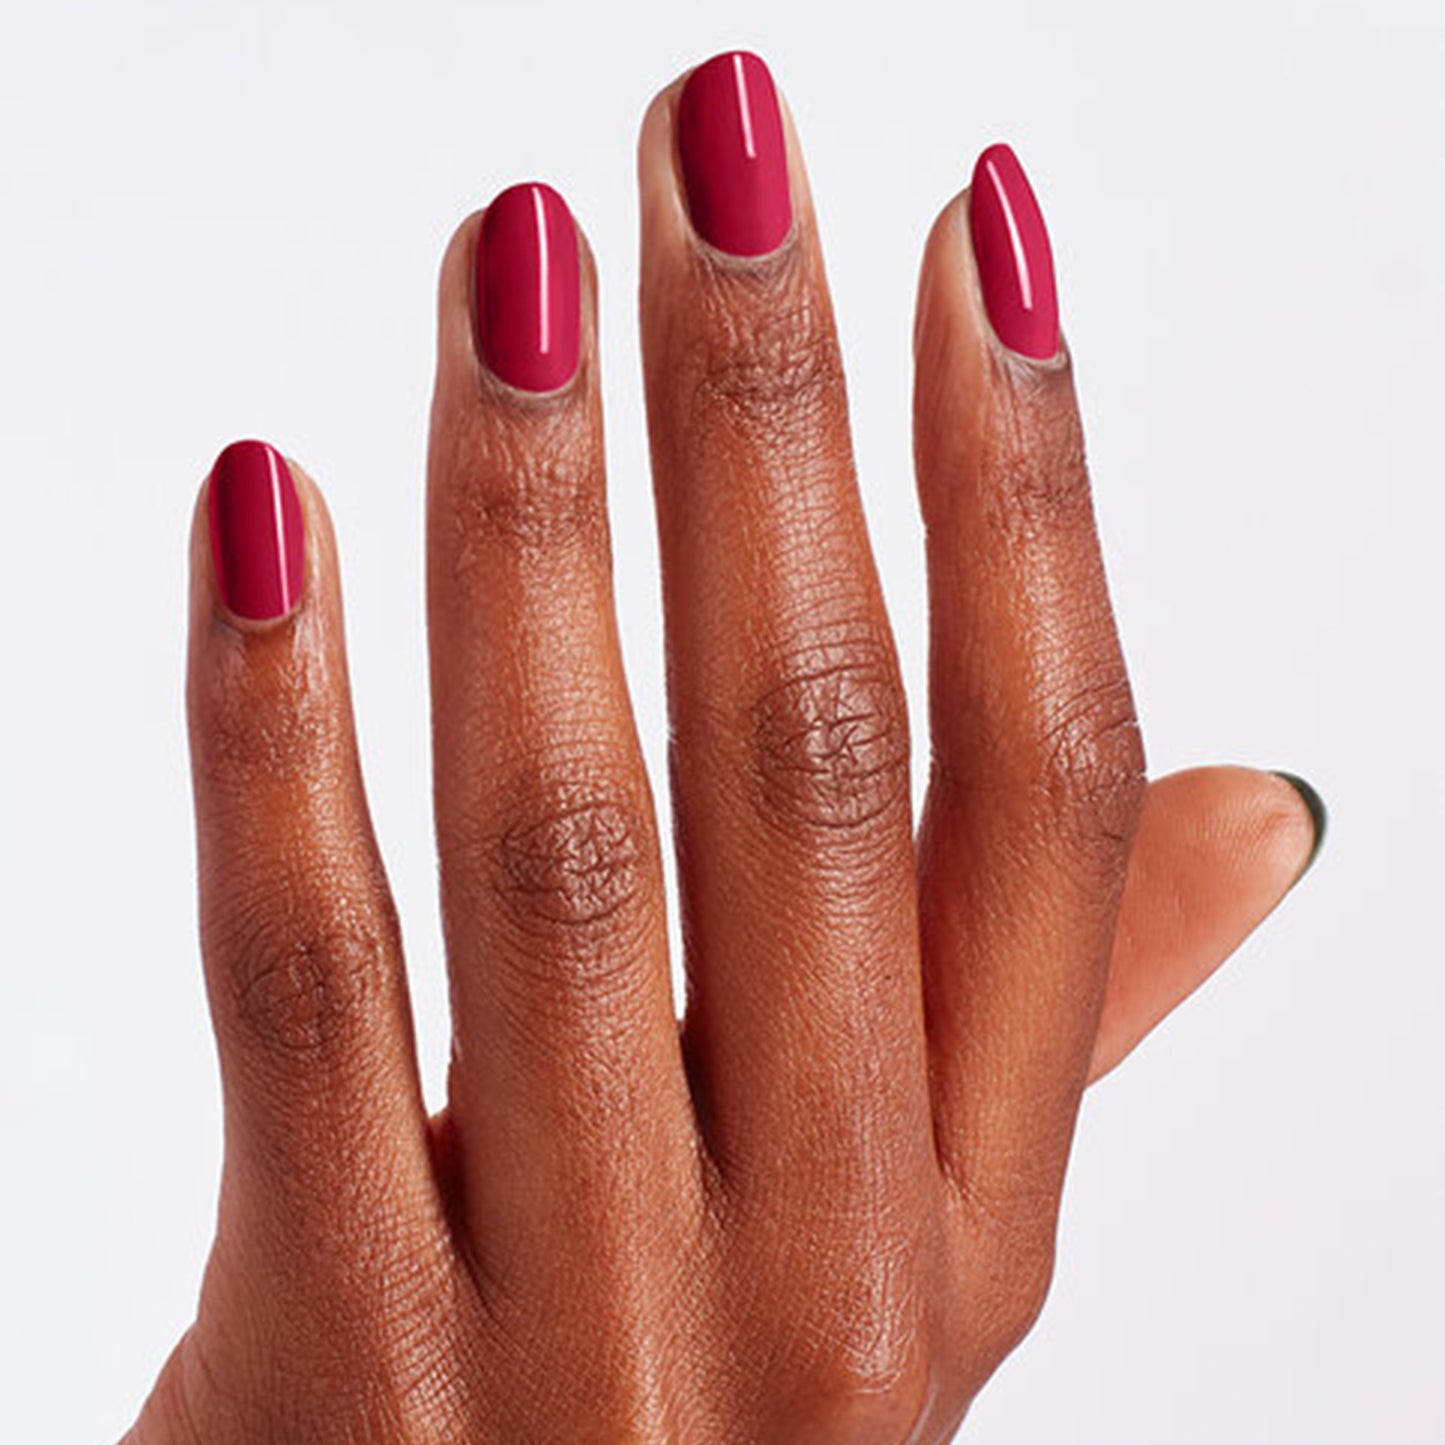 Nail Lacquer | Red-veal Your Truth